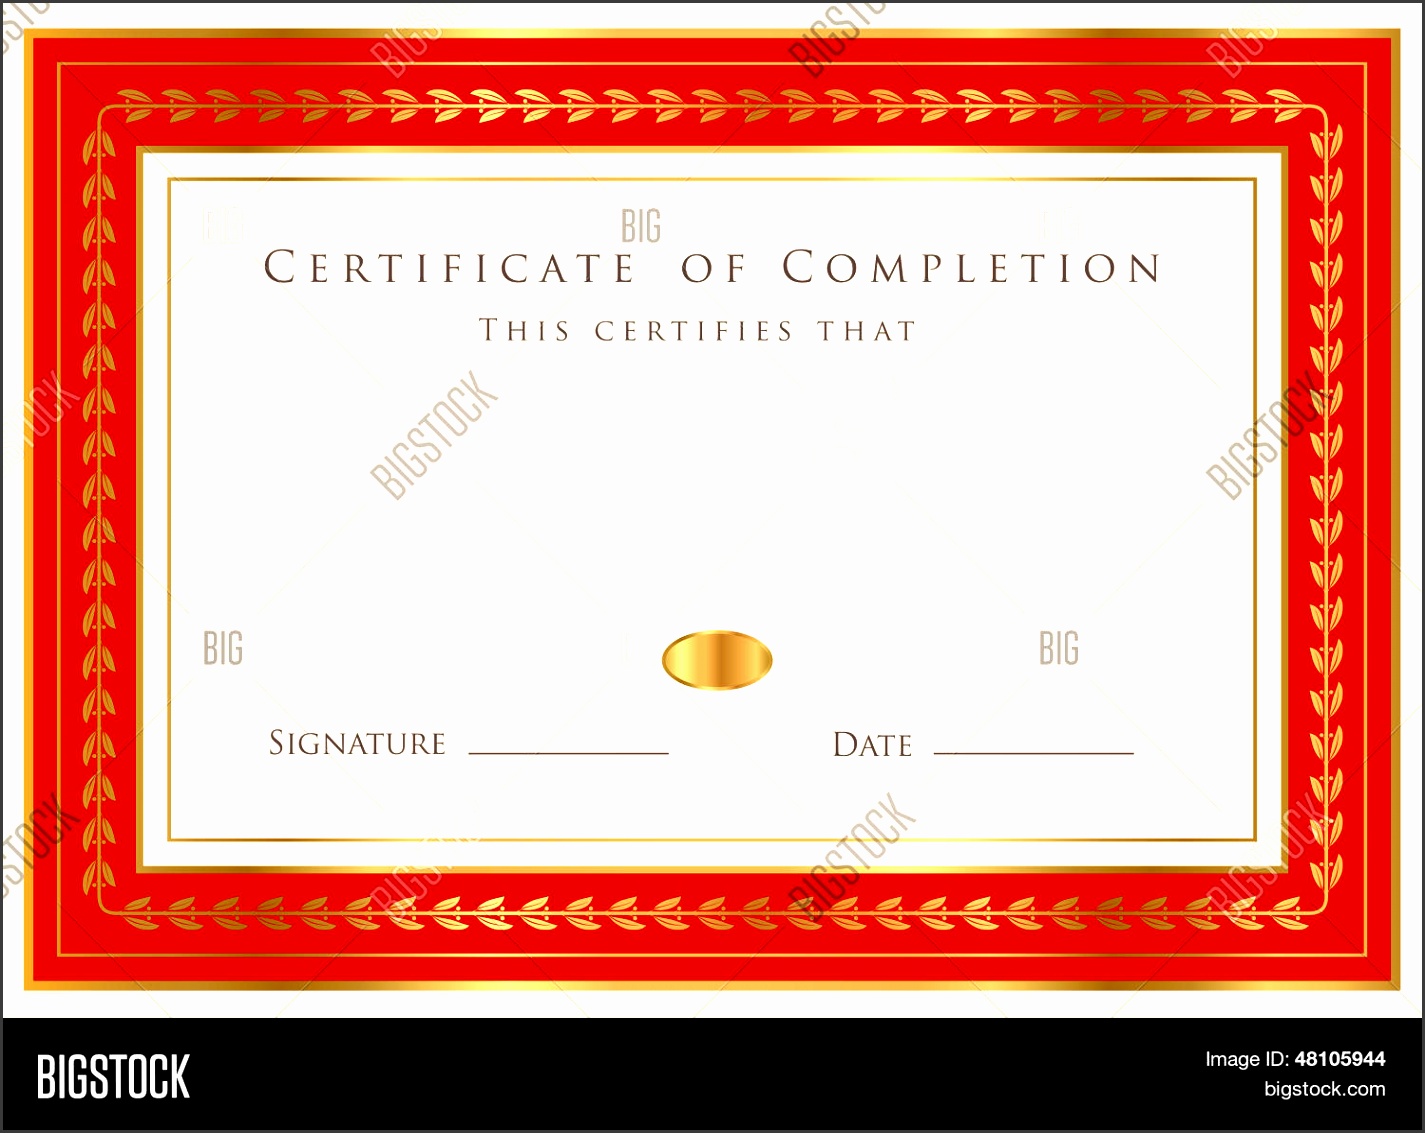 blue certificate of pletion template or sample background with golden floral pattern border